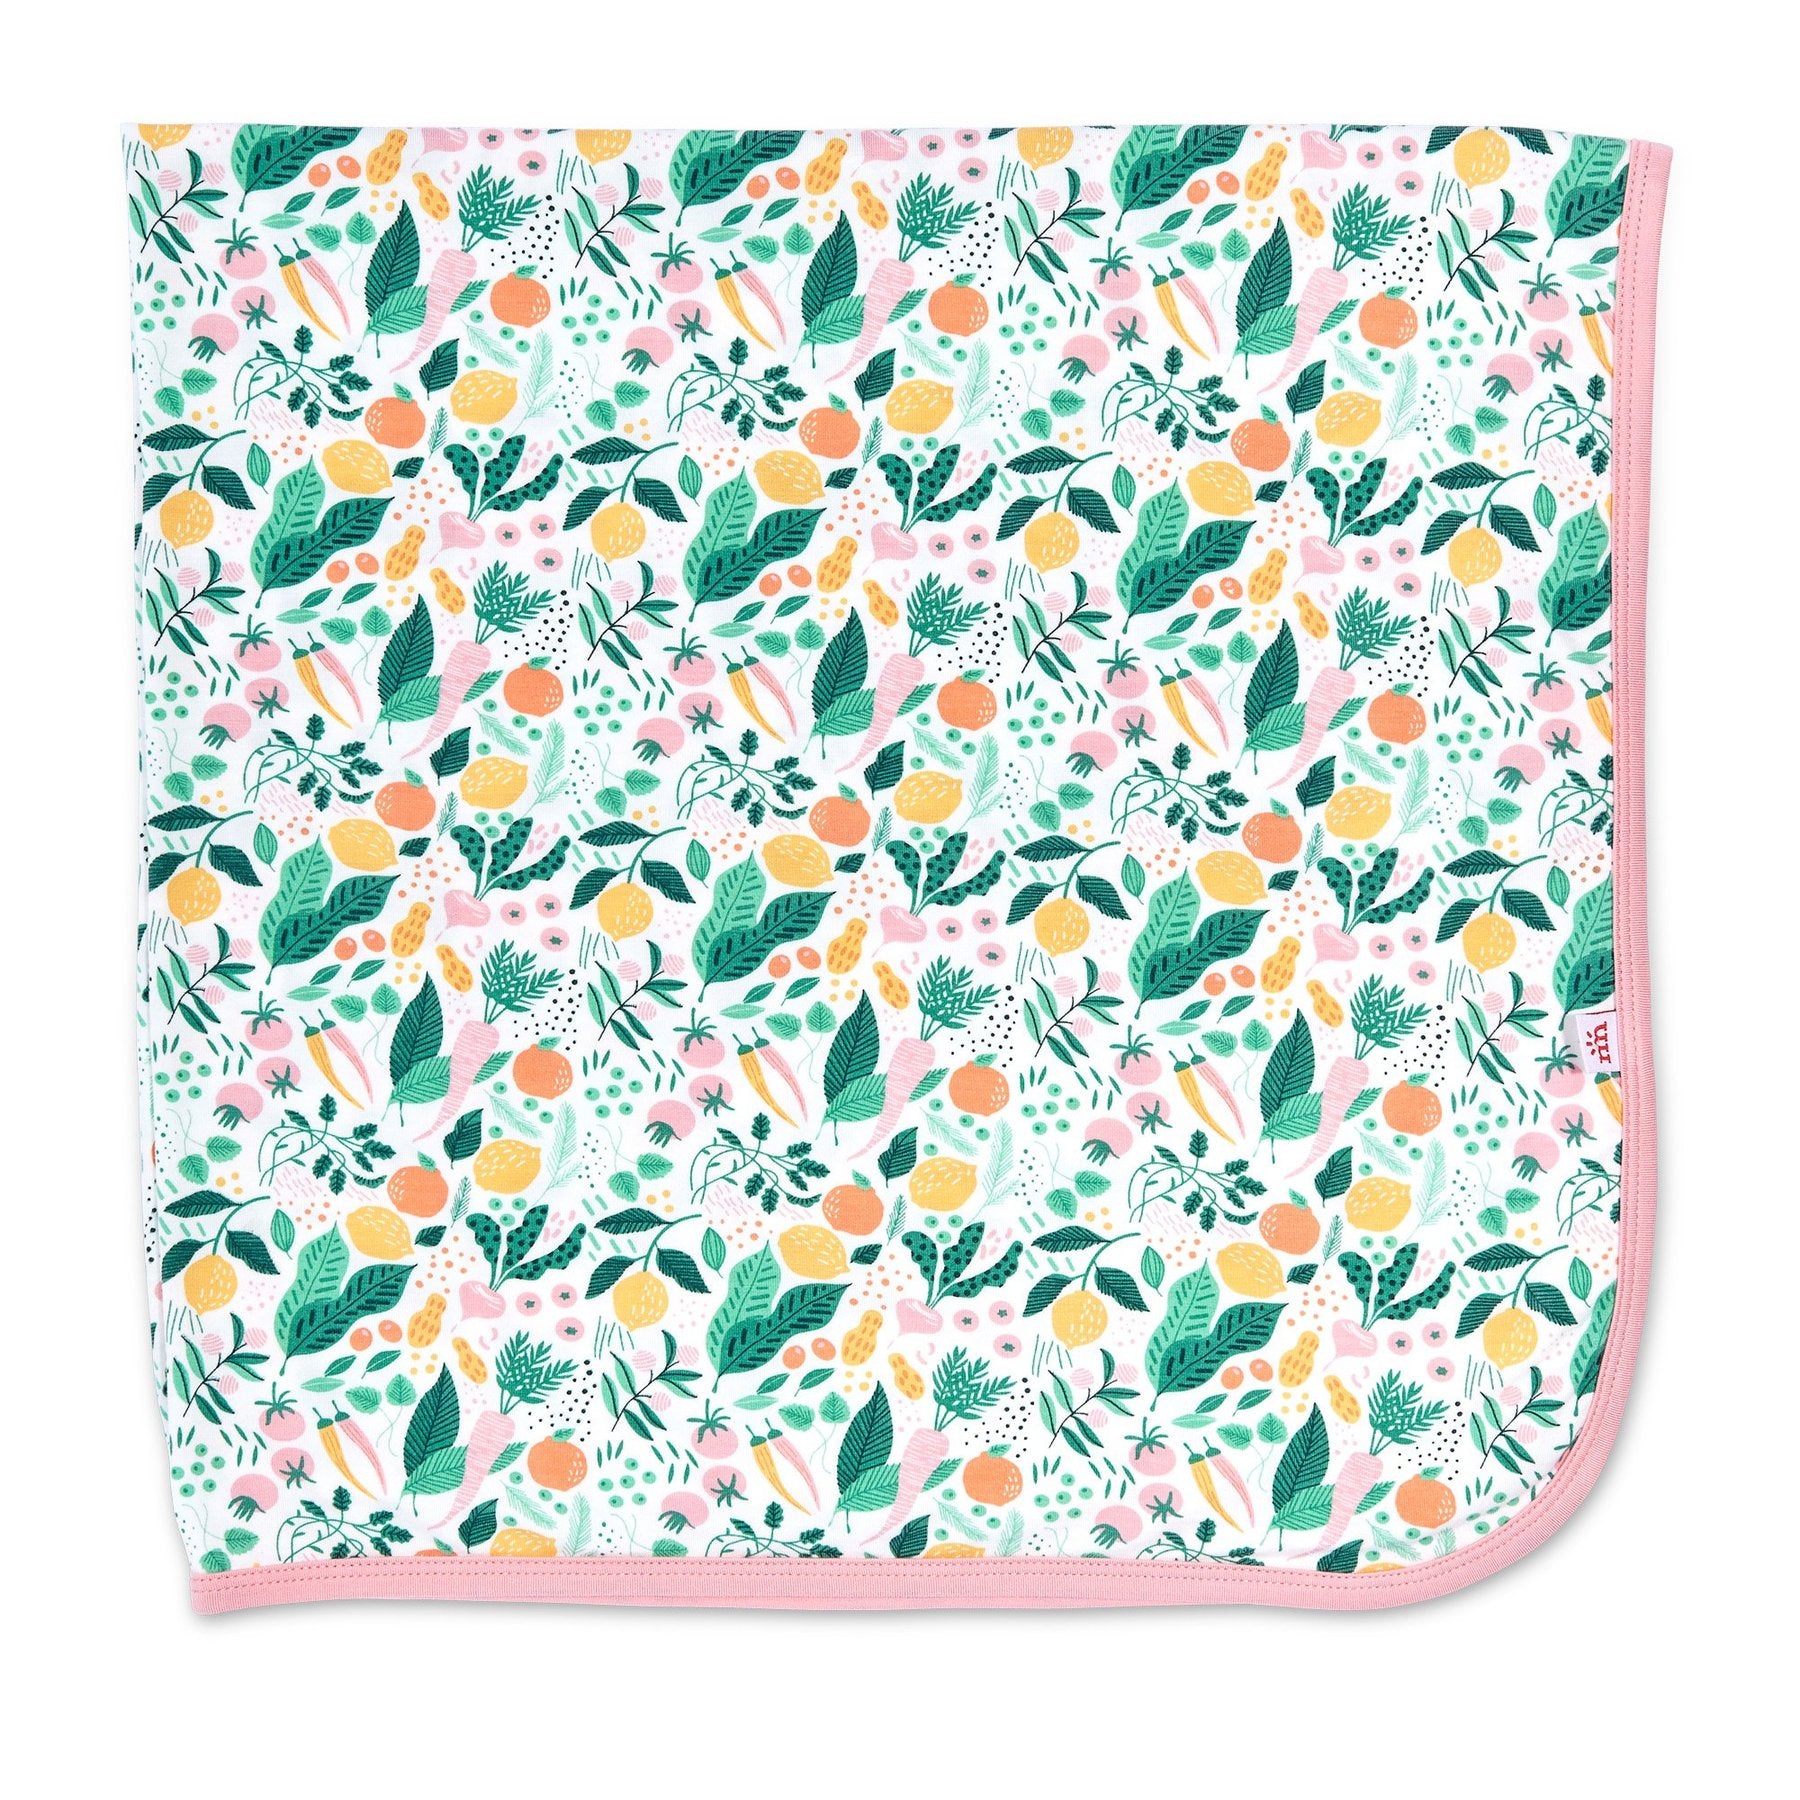 A cheerful fruit and vegetable printed modal swaddle baby blanket in yellow, orange, shades of green and pink.